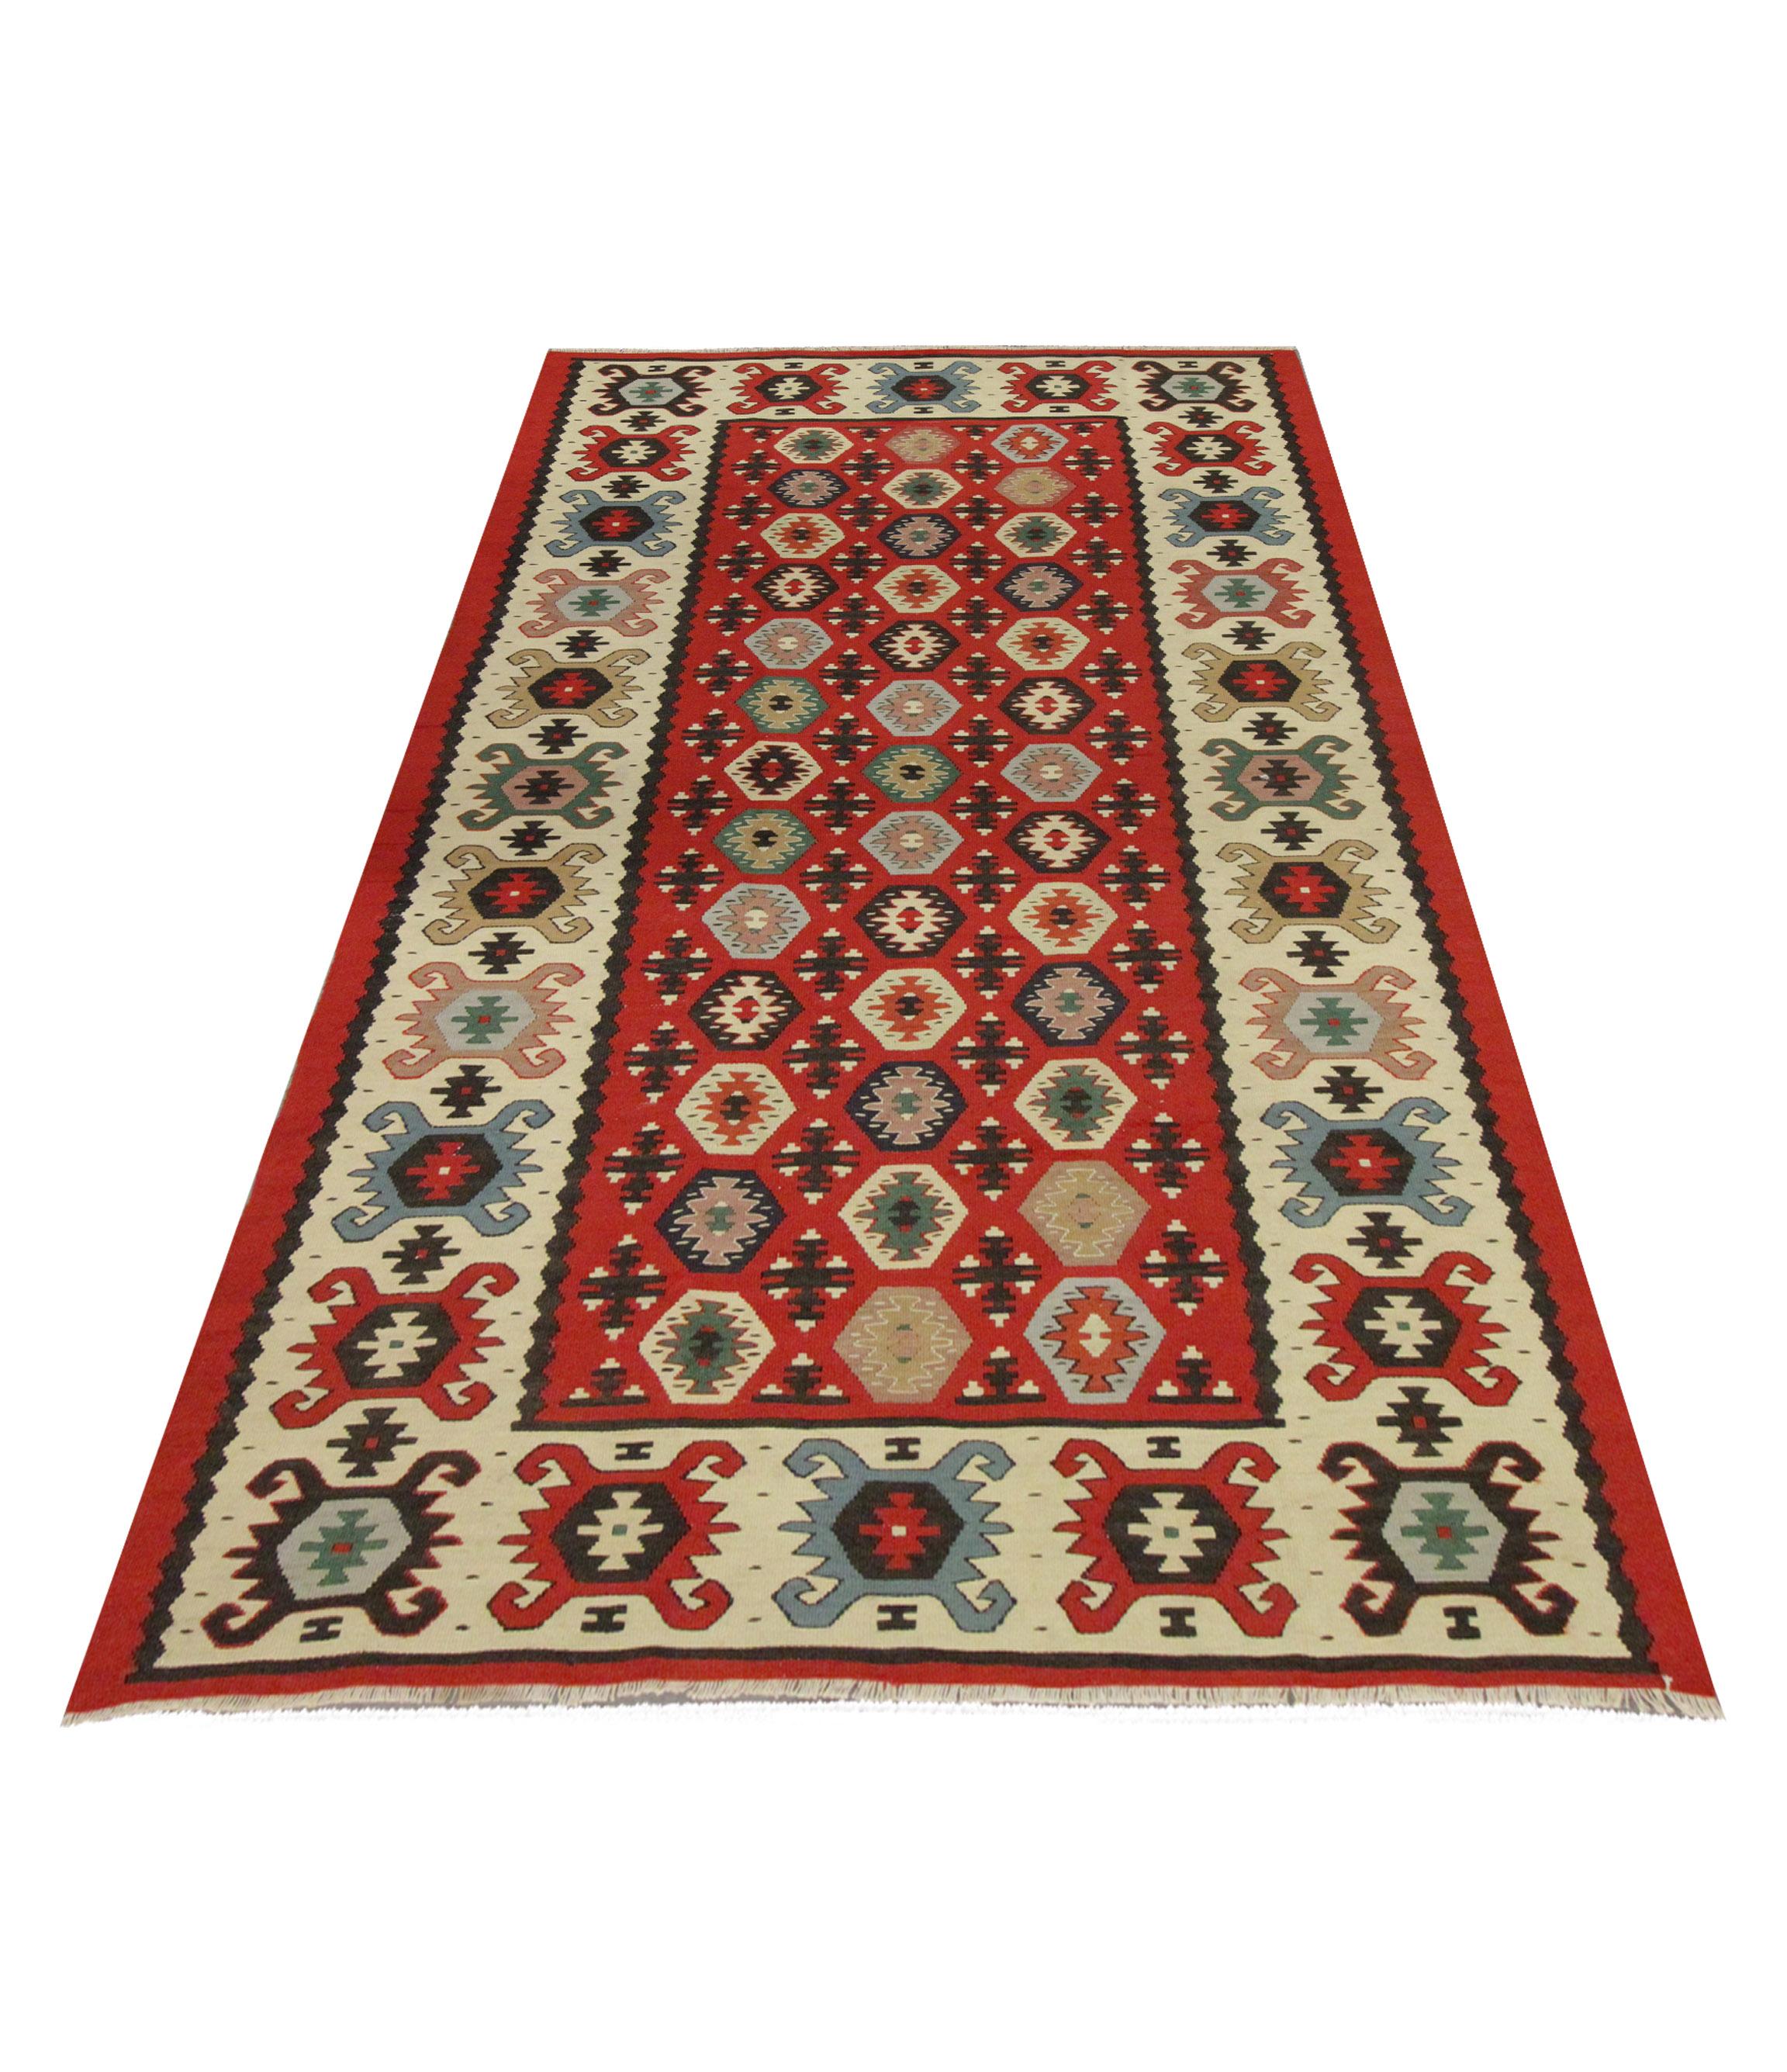 This area rug is a handwoven kilim from Sarkoy, Turkey woven by hand in the 1960s. The design has been woven on a rich red background with beige, blue pink and brown accents that make up the eye-catching geometric design. The rich colour palette and